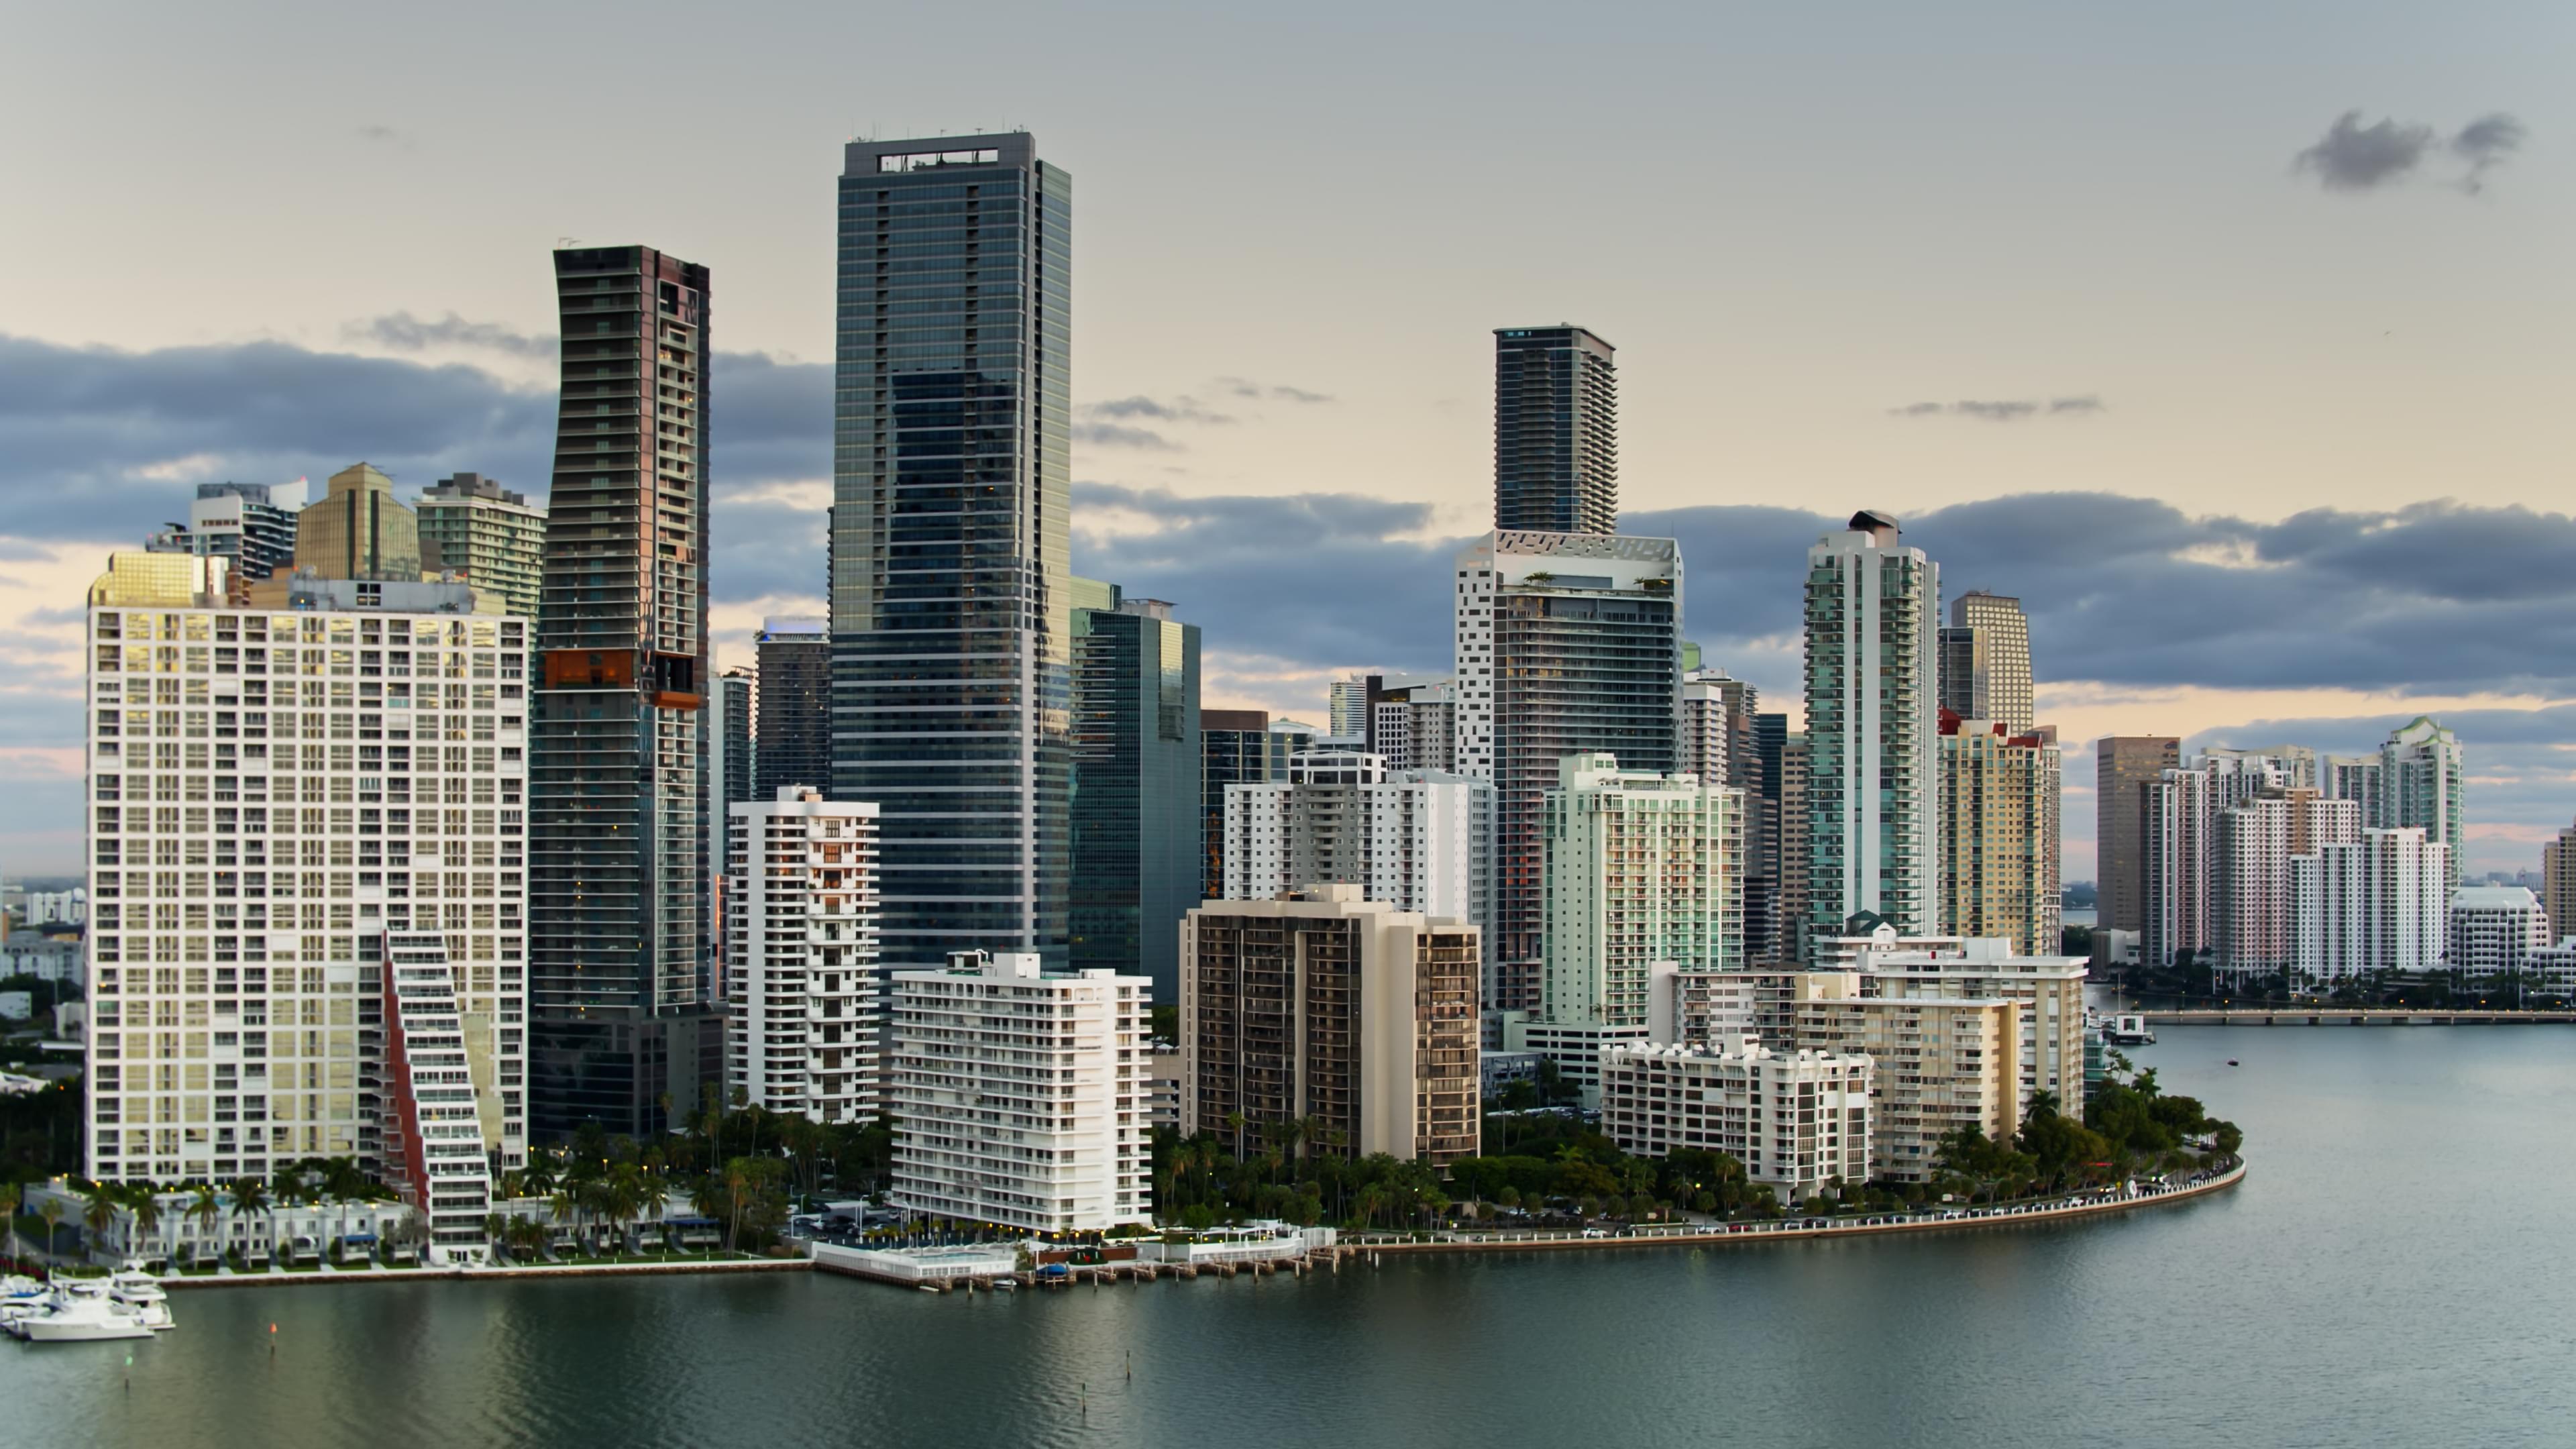 The State of Florida has granted SURA Asset Management authorization to operate via an offshore solution in the USA